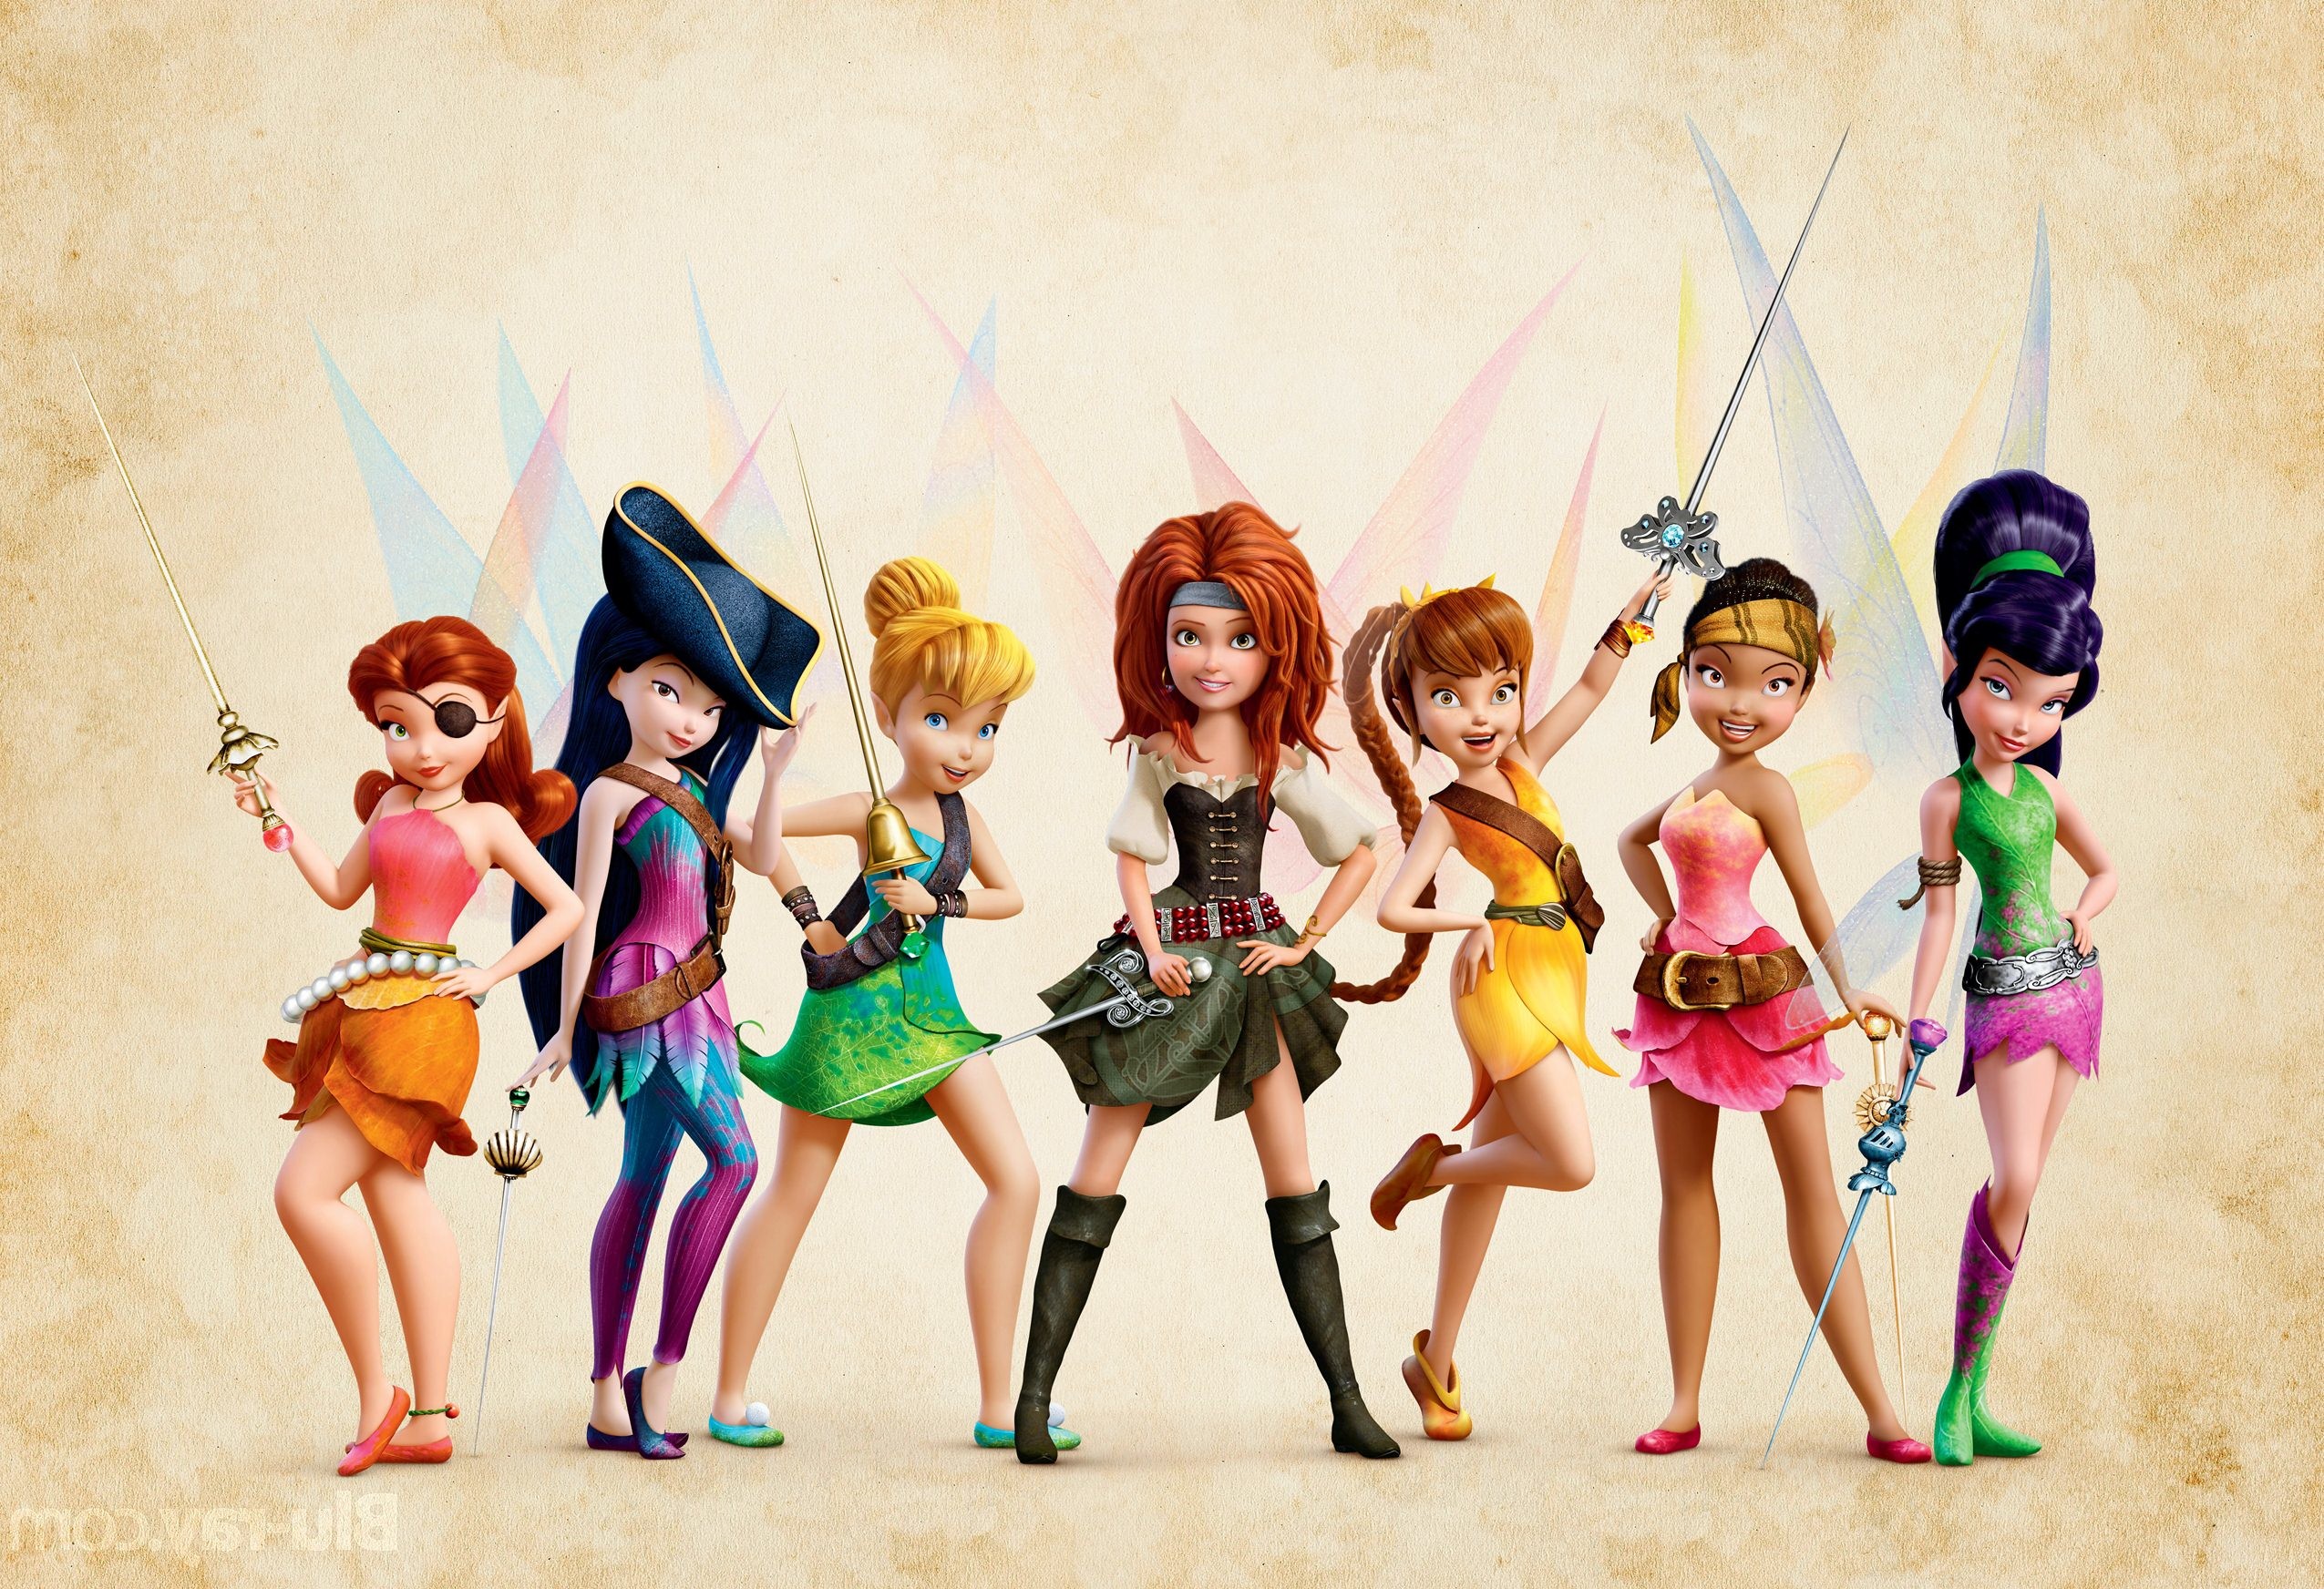 2550x1744 Movie - The Pirate Fairy Fairy Tinker Bell Wallpaper